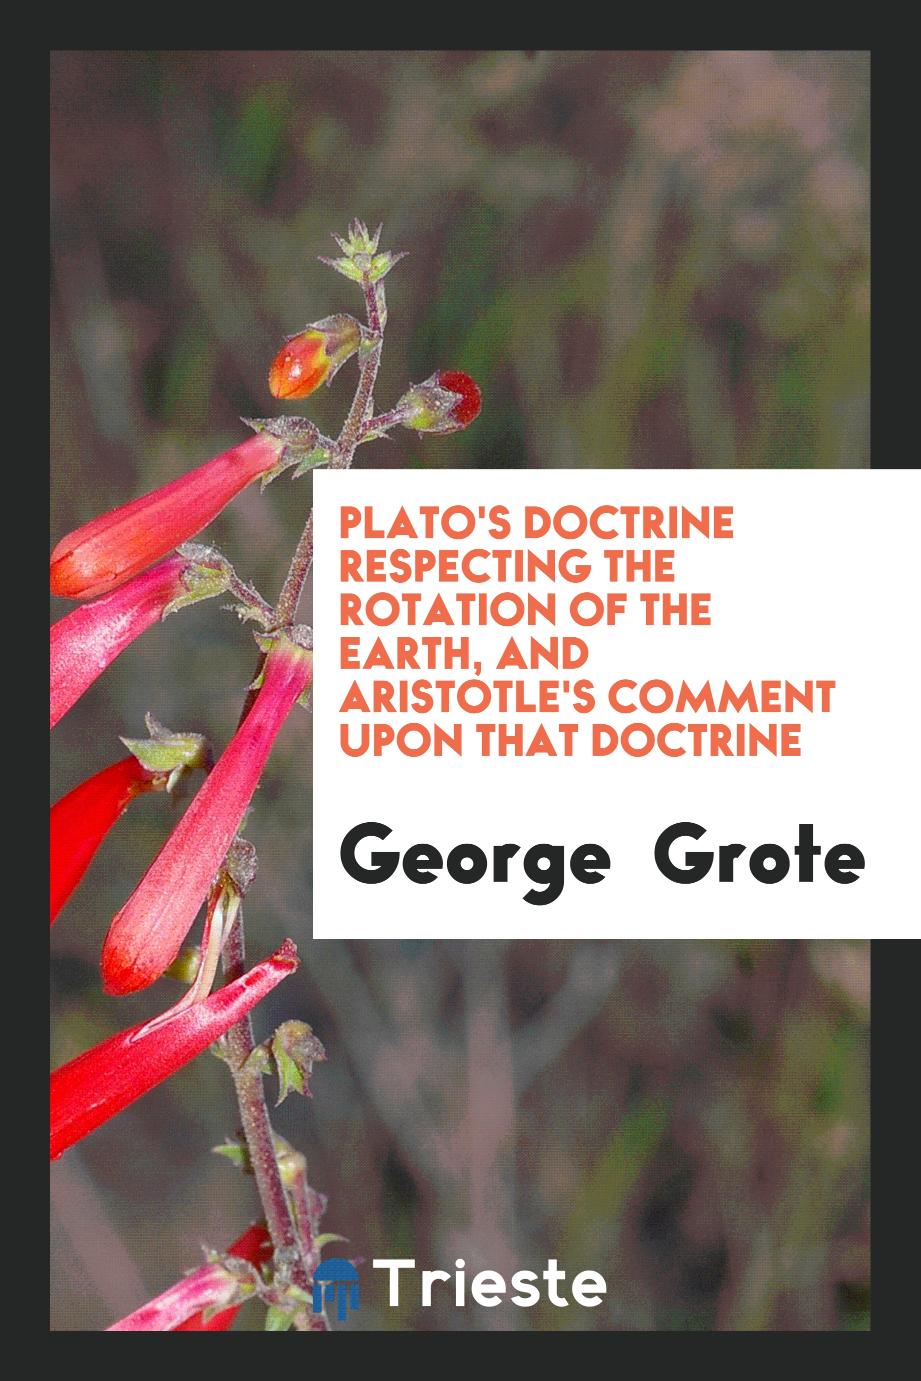 Plato's Doctrine Respecting the Rotation of the Earth, and Aristotle's Comment Upon that Doctrine